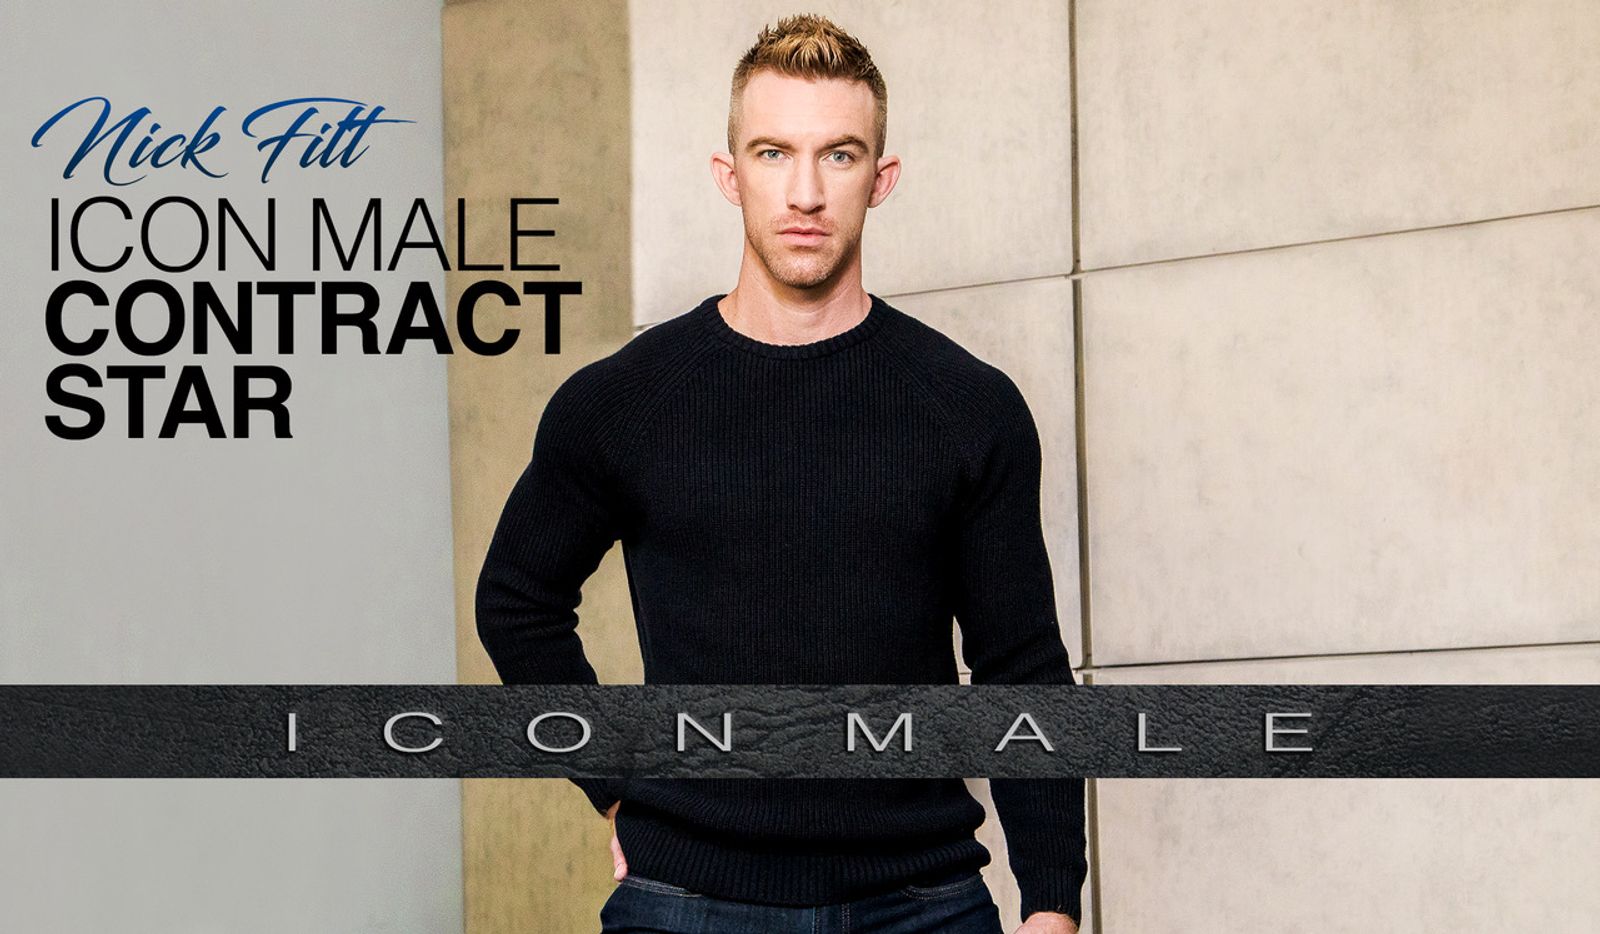 Nick Fitt to Represent Icon Male Under Exclusive Contract